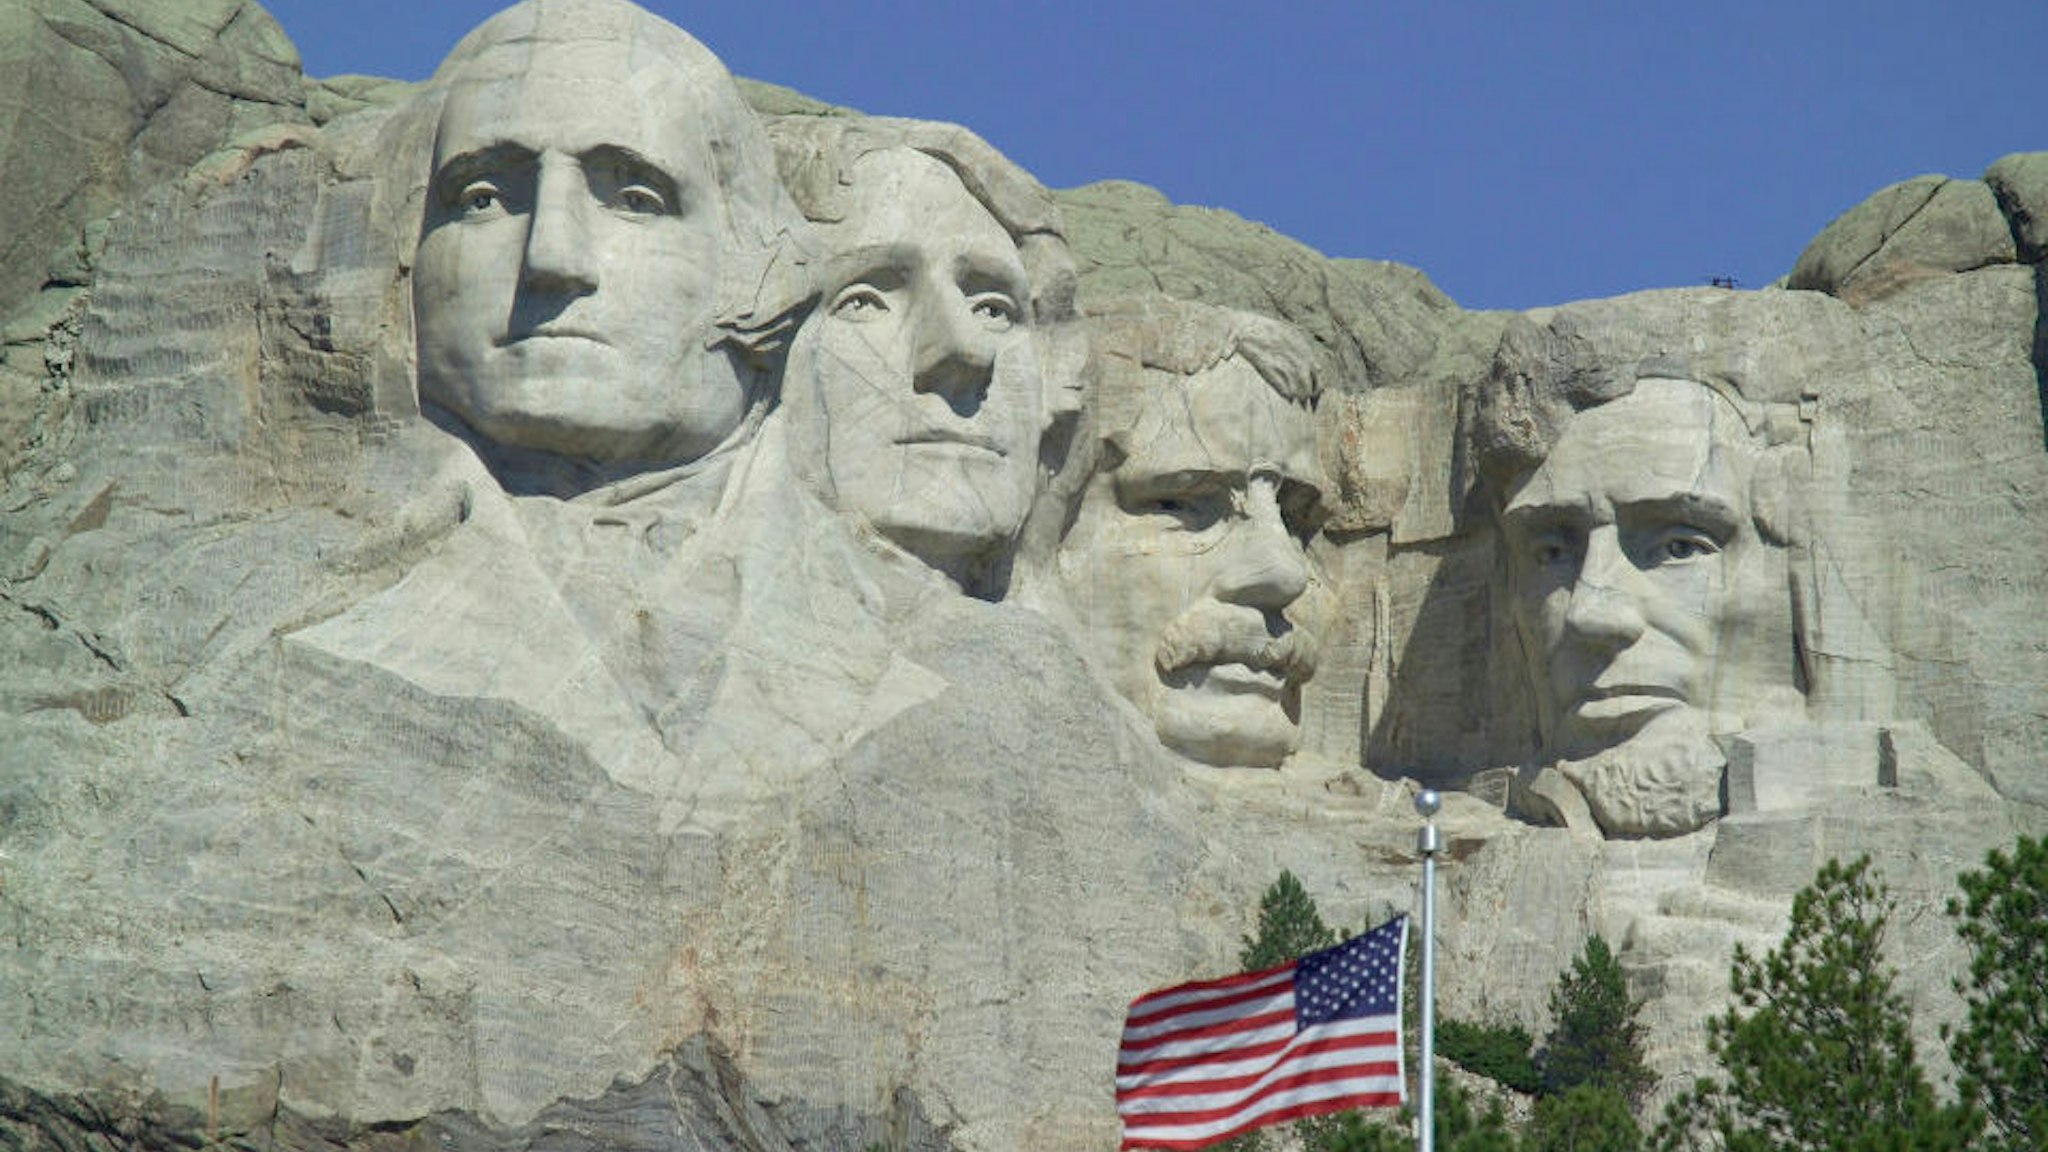 The faces of American Presidents George Washington, Thomas Jefferson, Theodore Roosevelt e Abraham Lincoln carved in the granite, American flag in the foreground, Mount Rushmore National Memorial, South Dakota, United States of America.